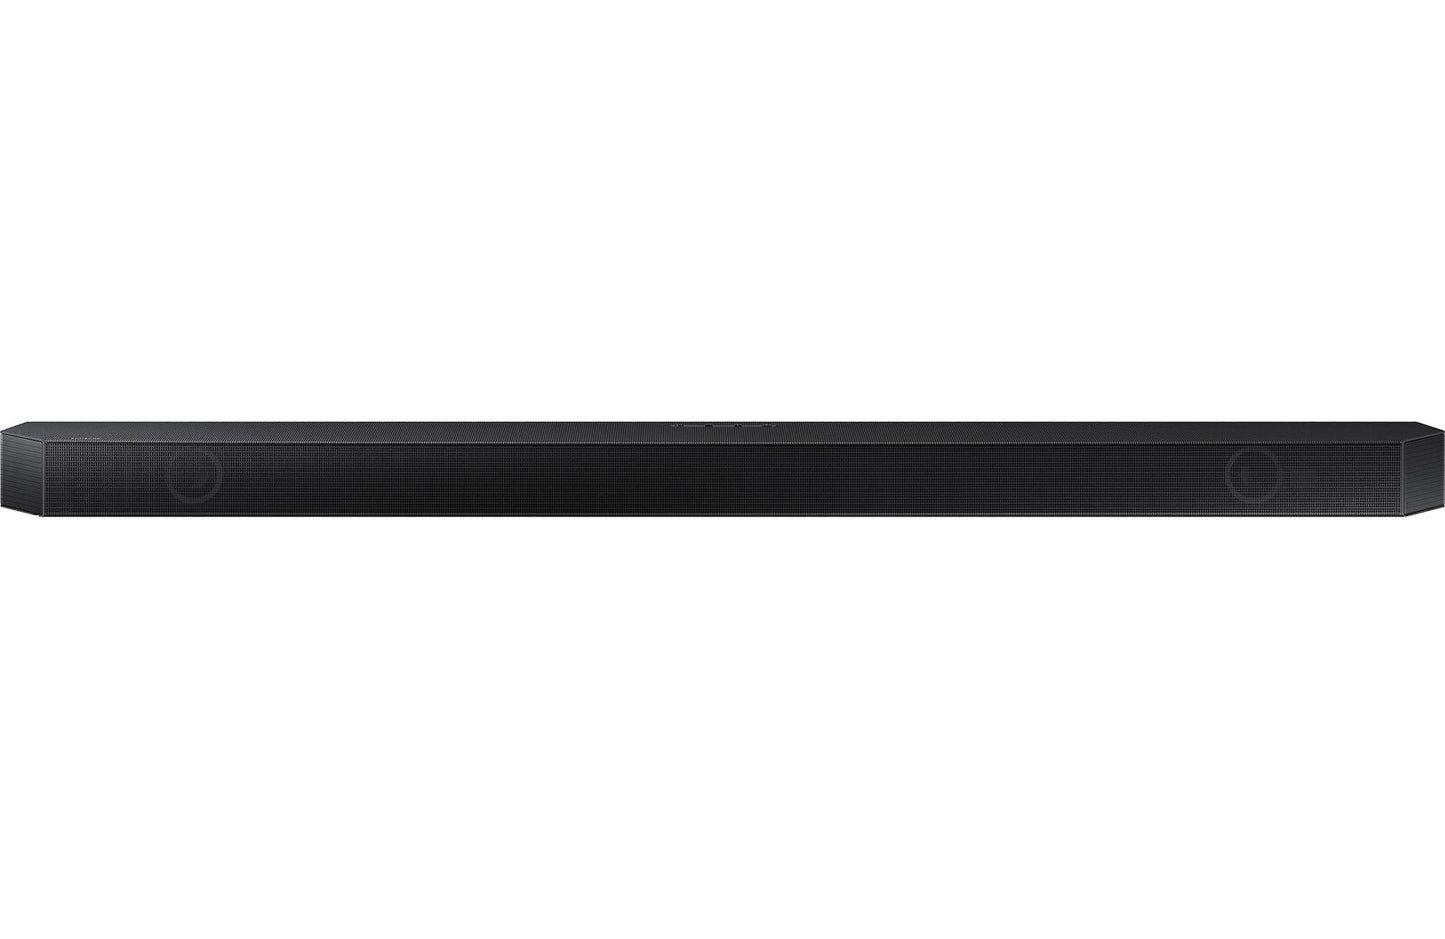 Samsung HW-Q700B Powered 3.1.2-channel sound bar and wireless subwoofer system